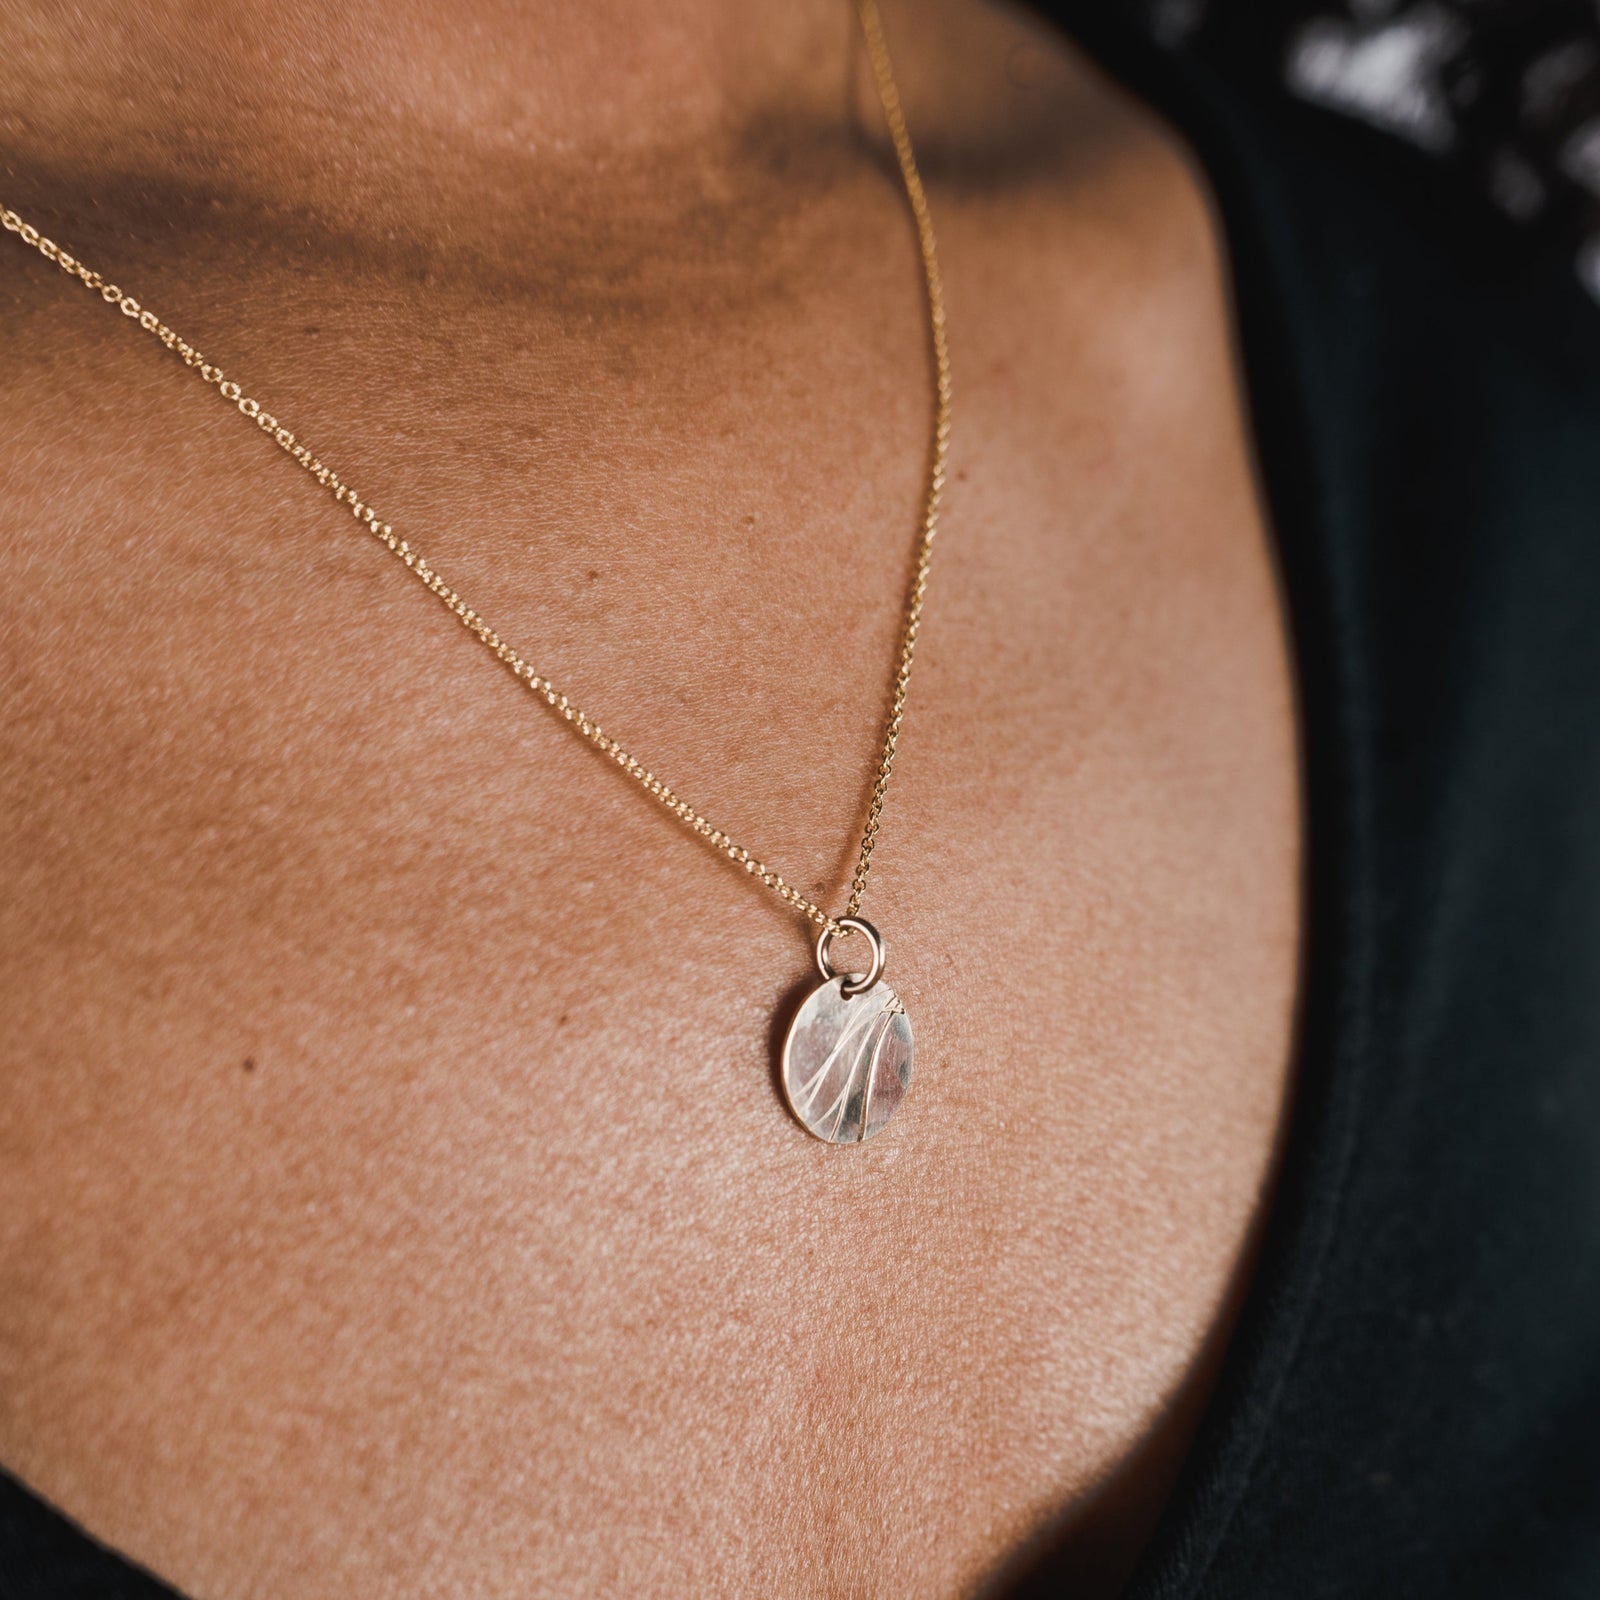 River Necklace with a leaf pendant charm, worn by a person, designed by Becoming Jewelry.